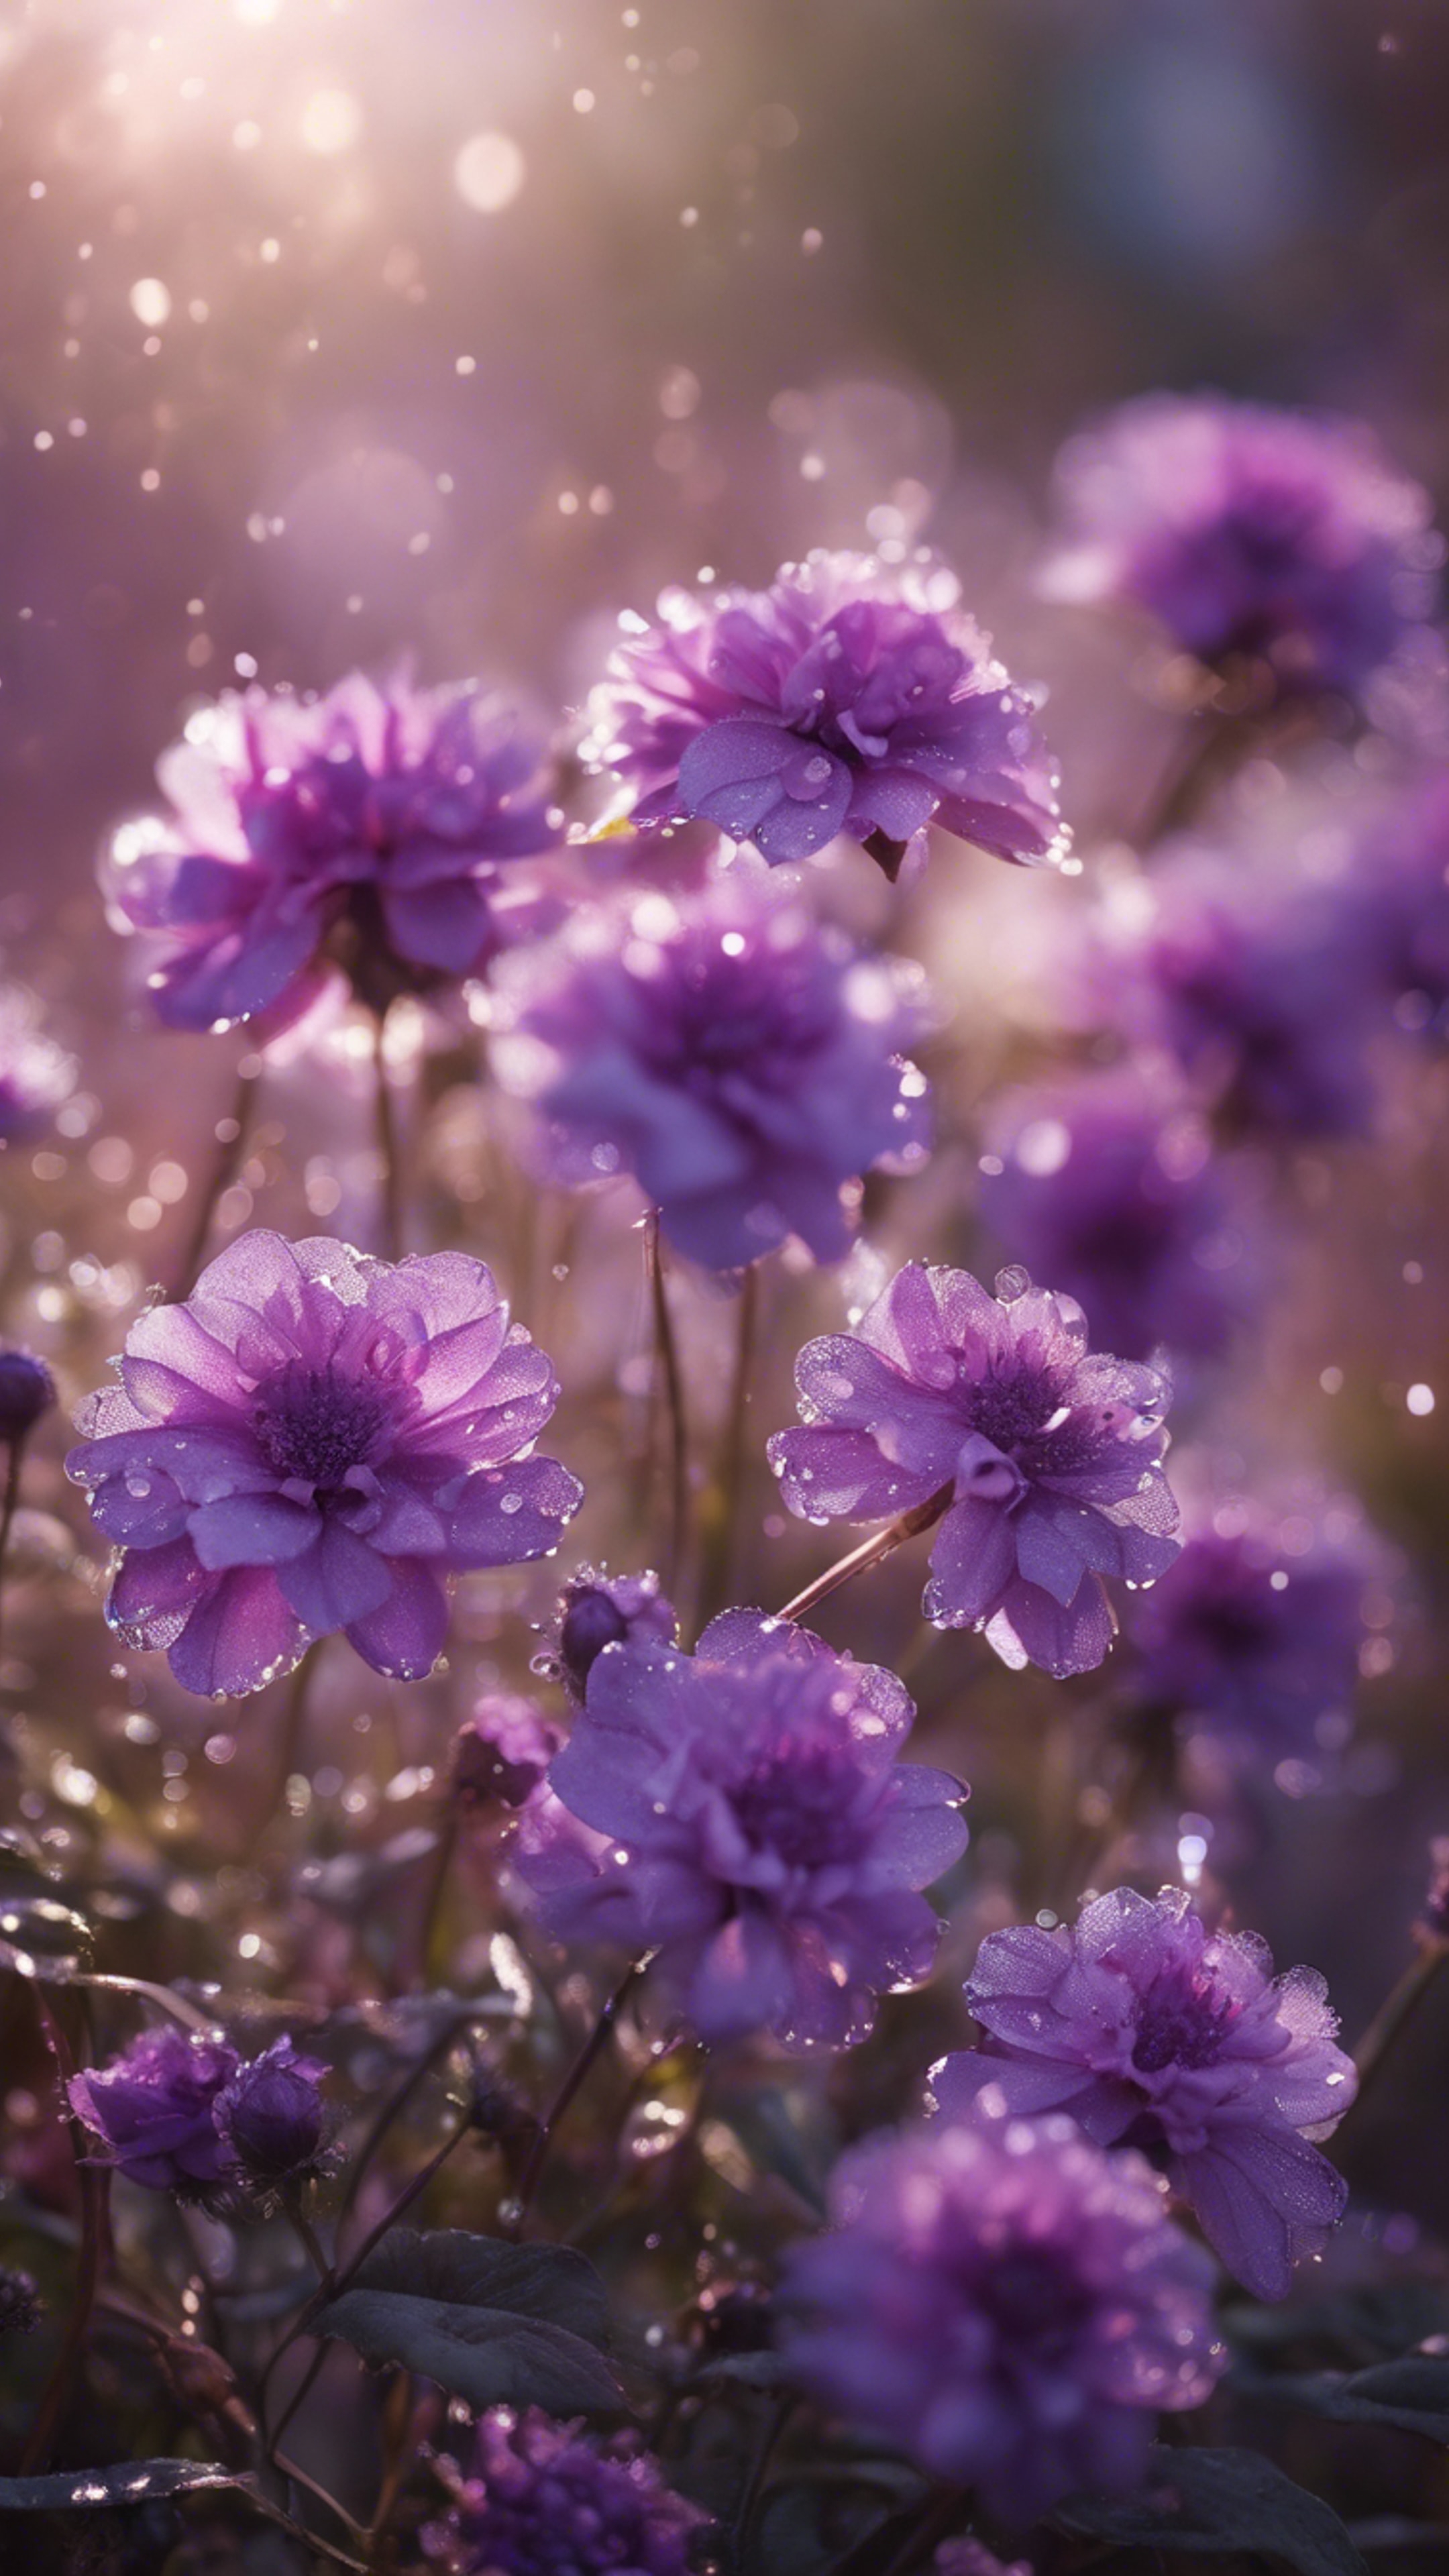 An impressive collage of purple flowers in full bloom, highlighted by sparkling morning dew. Tapeta na zeď[23d1df20d4e341739cf3]